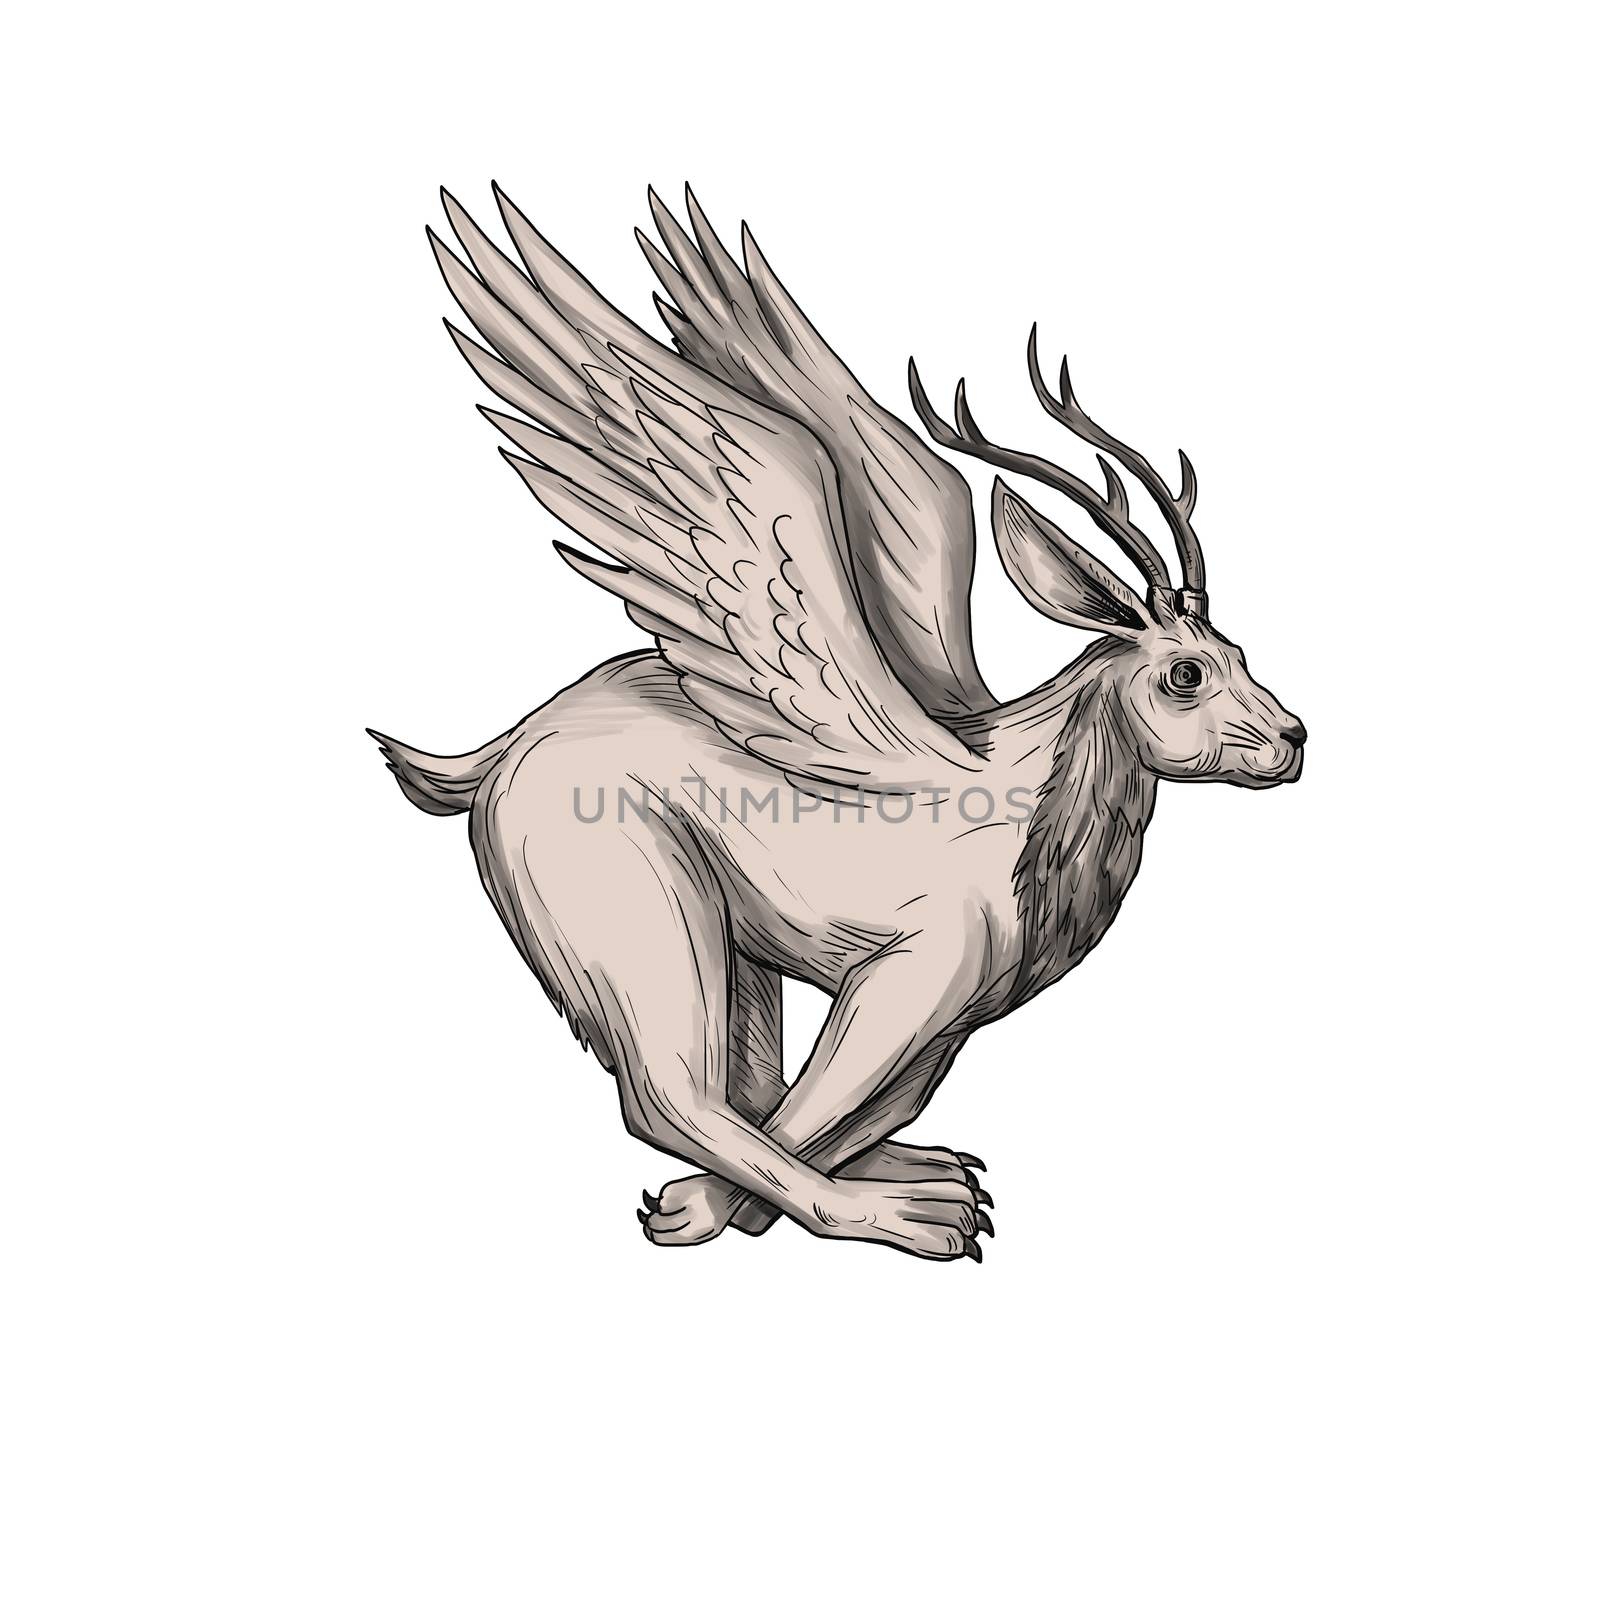 Tattoo style illustration of a Wolpertinger, in Bavarian folklore, a mythical hare with antlers, fangs and wings running viewed from the side set on isolated white background. 